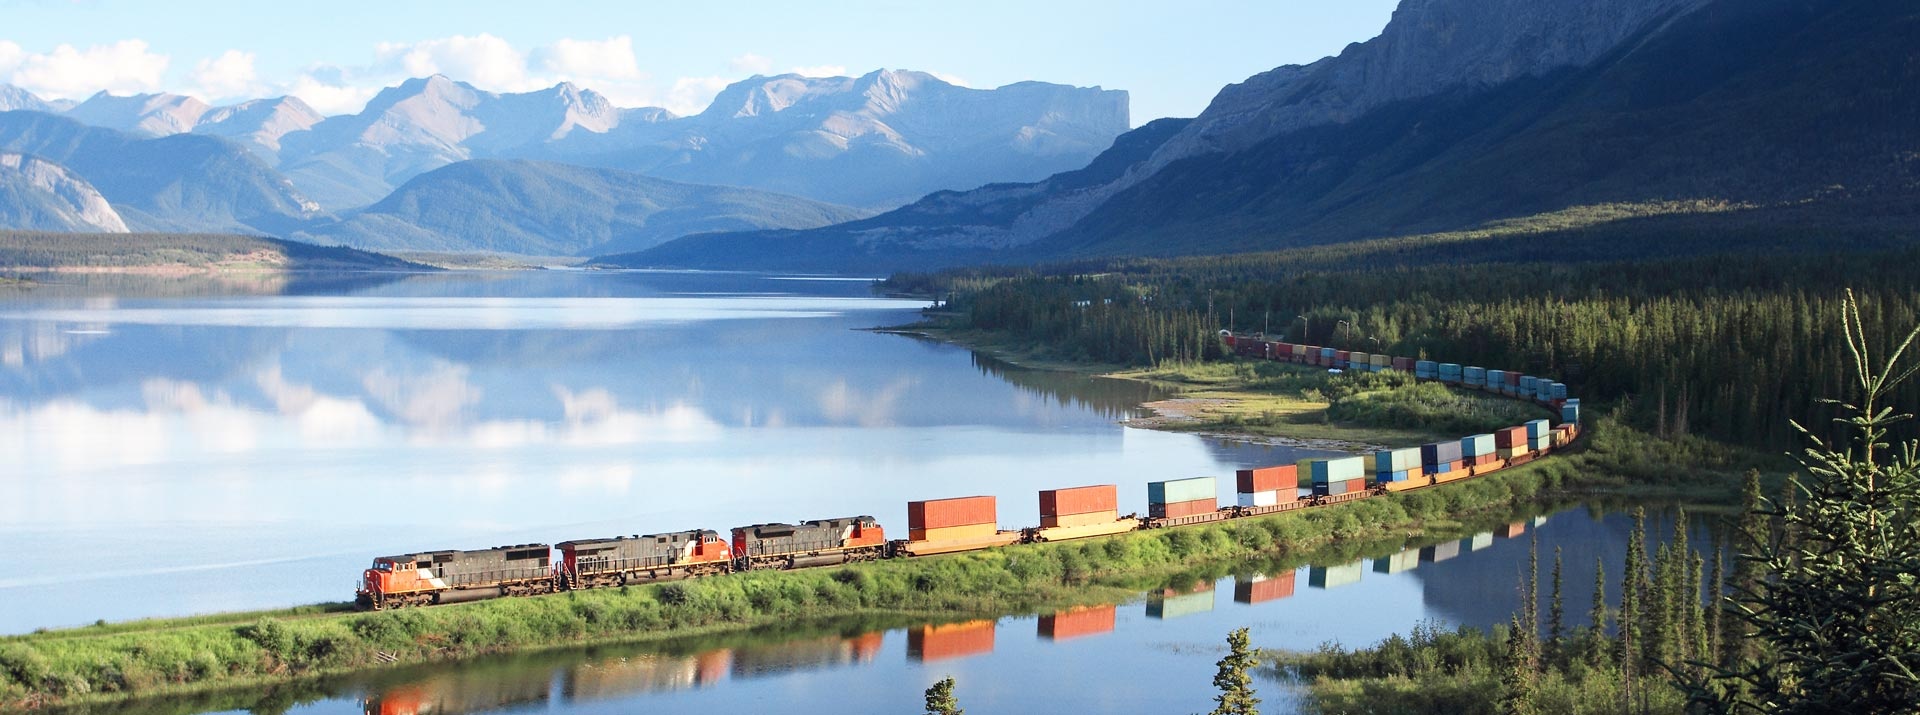 Freight-train-drives-infront-of-the-Brûlé-lake, Canada, with-mountains-in-the-background